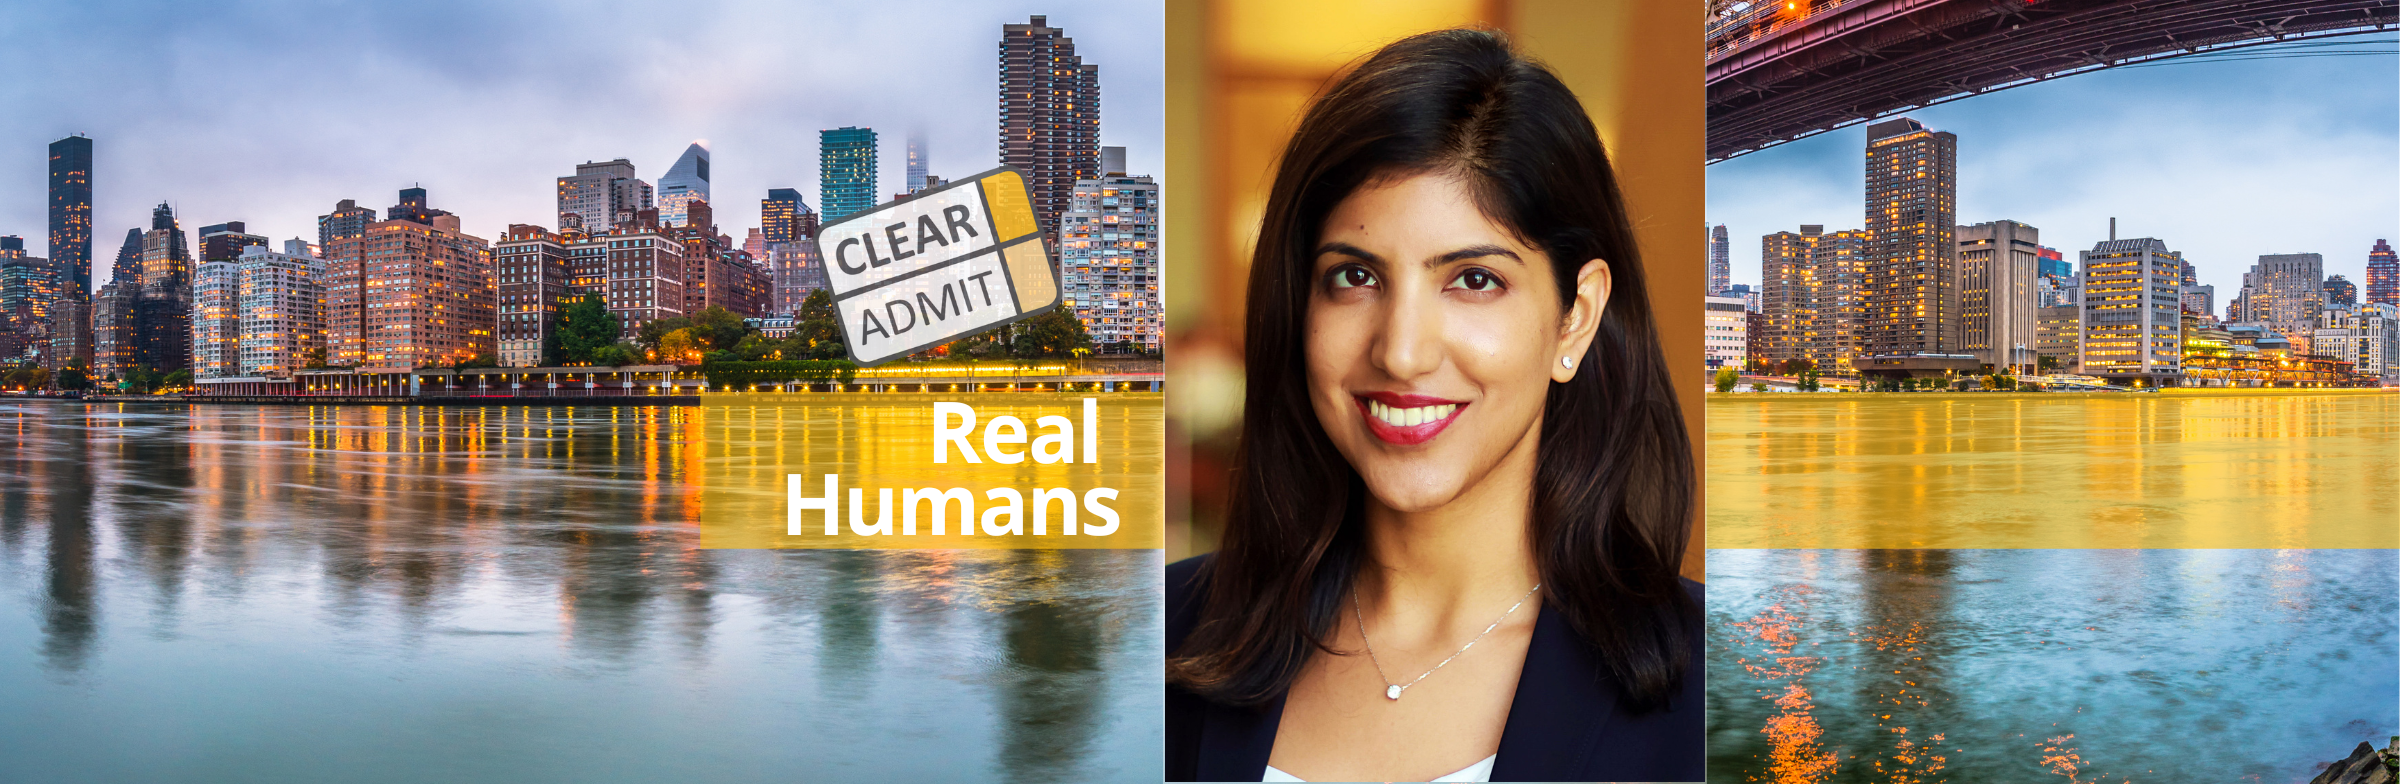 Image for Real Humans of Citi: Sania Mohammed, Georgetown McDonough MBA ’20, Business Management & Strategy VP